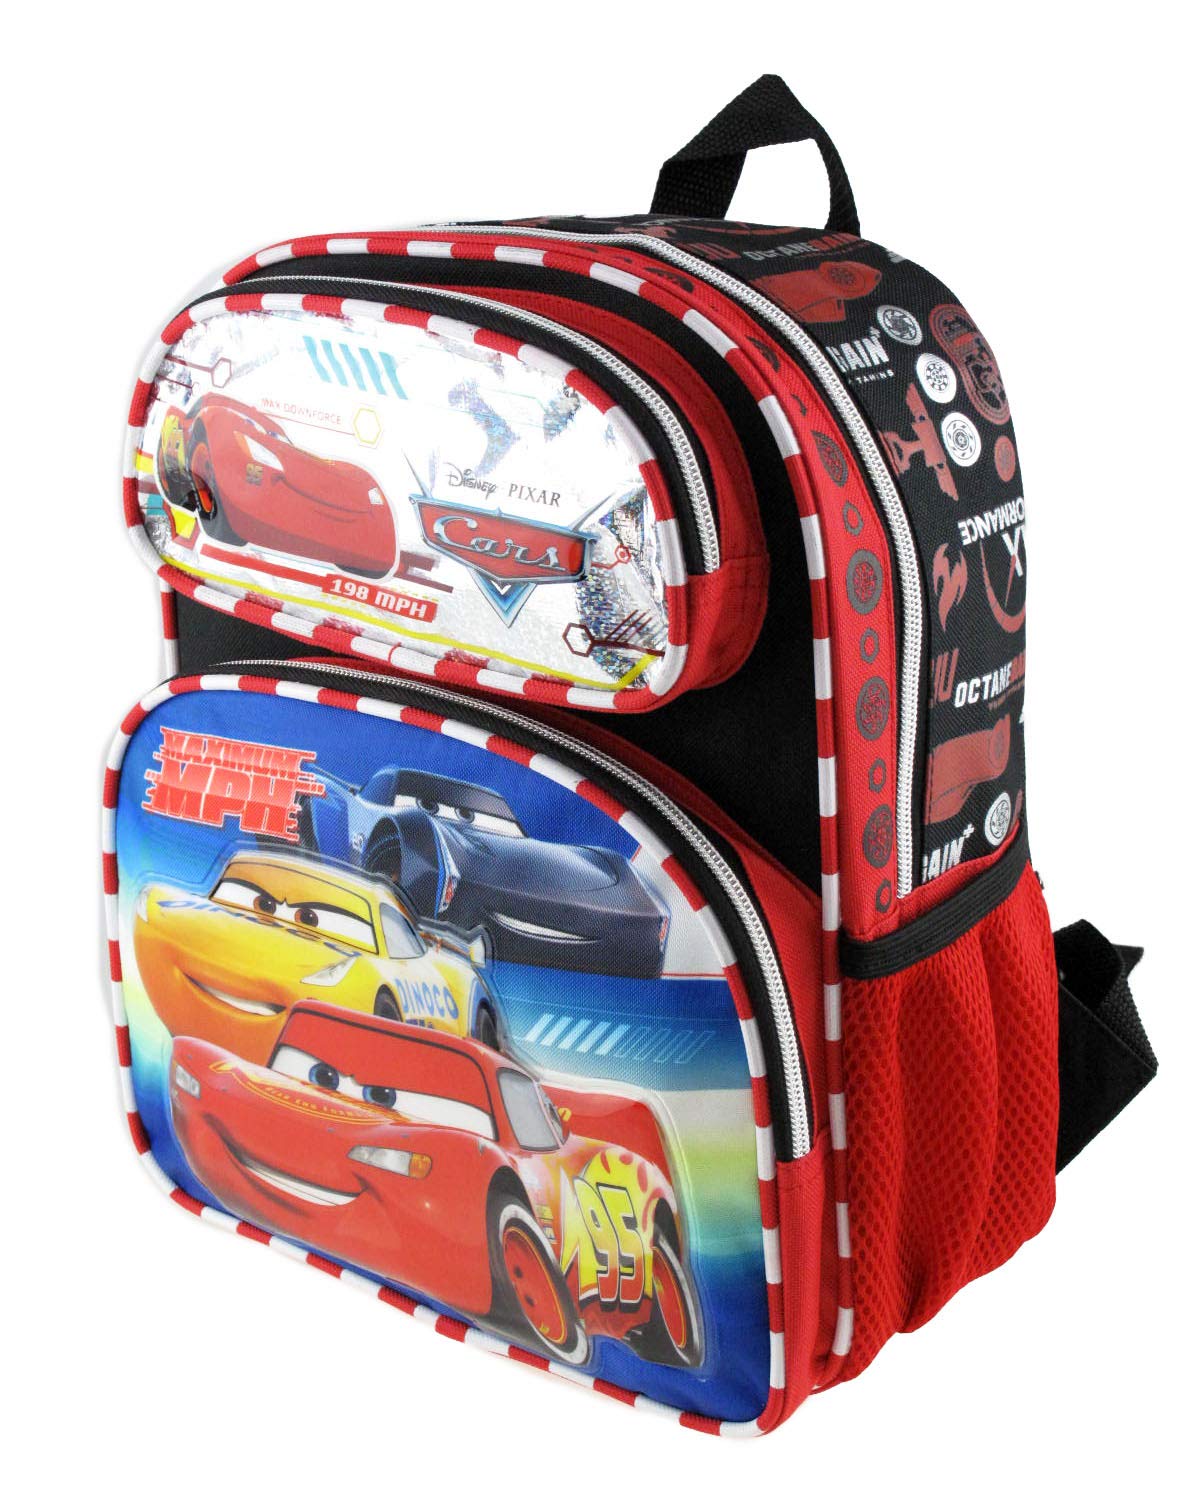 Small Backpack - Disney - Cars Top Engine 12" New 008673 - image 3 of 3